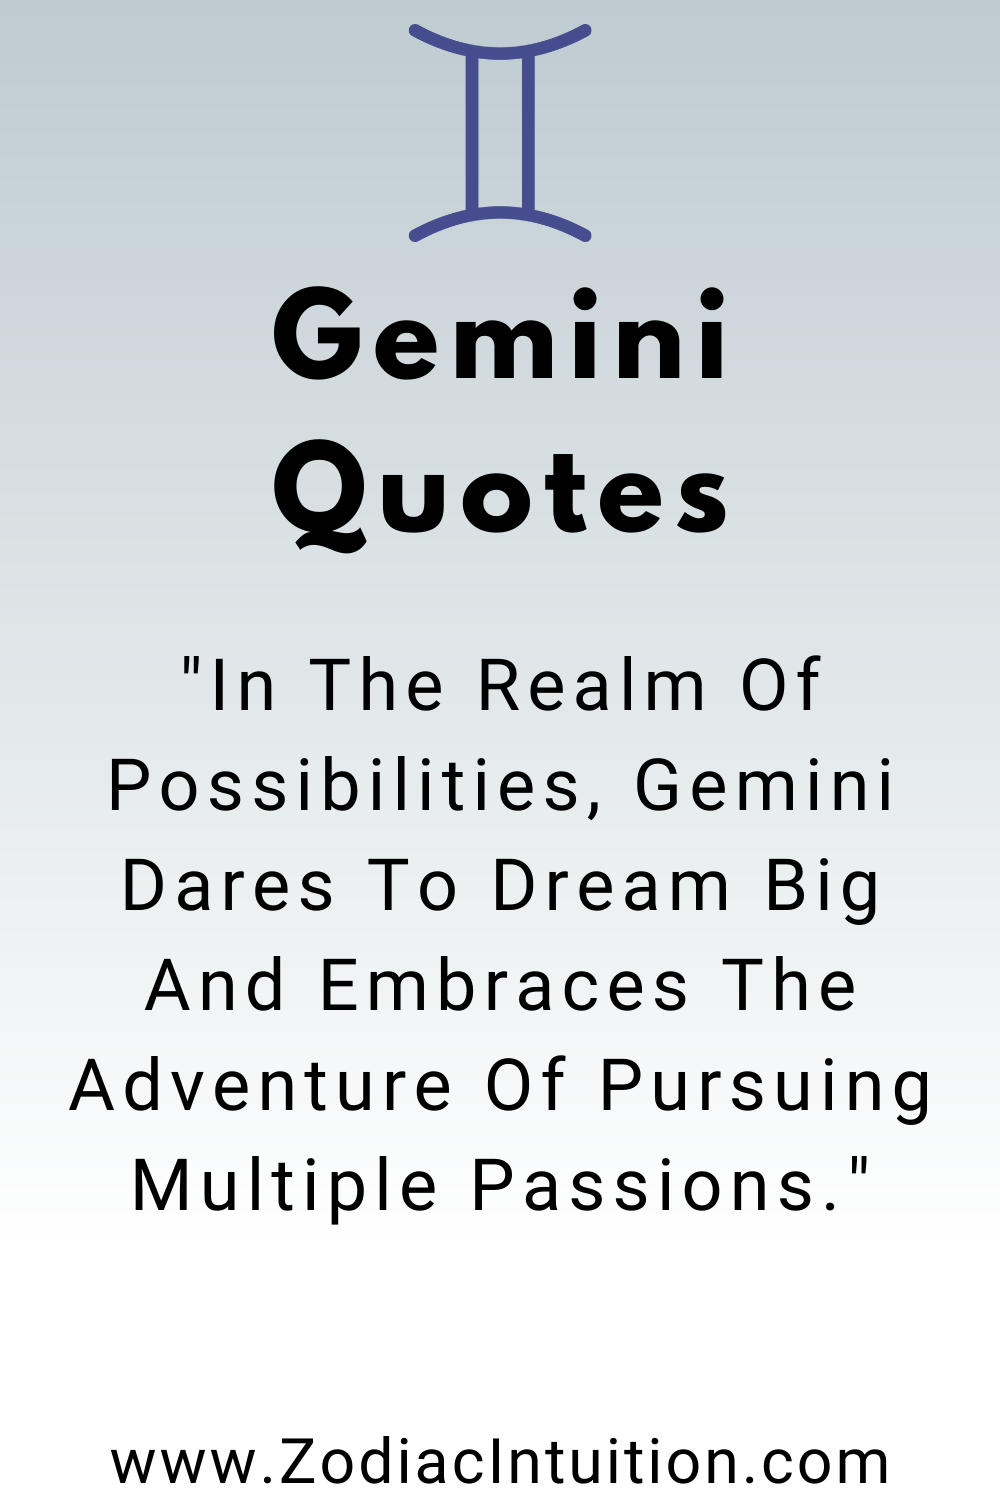 Top 5 Gemini Quotes And Inspiration